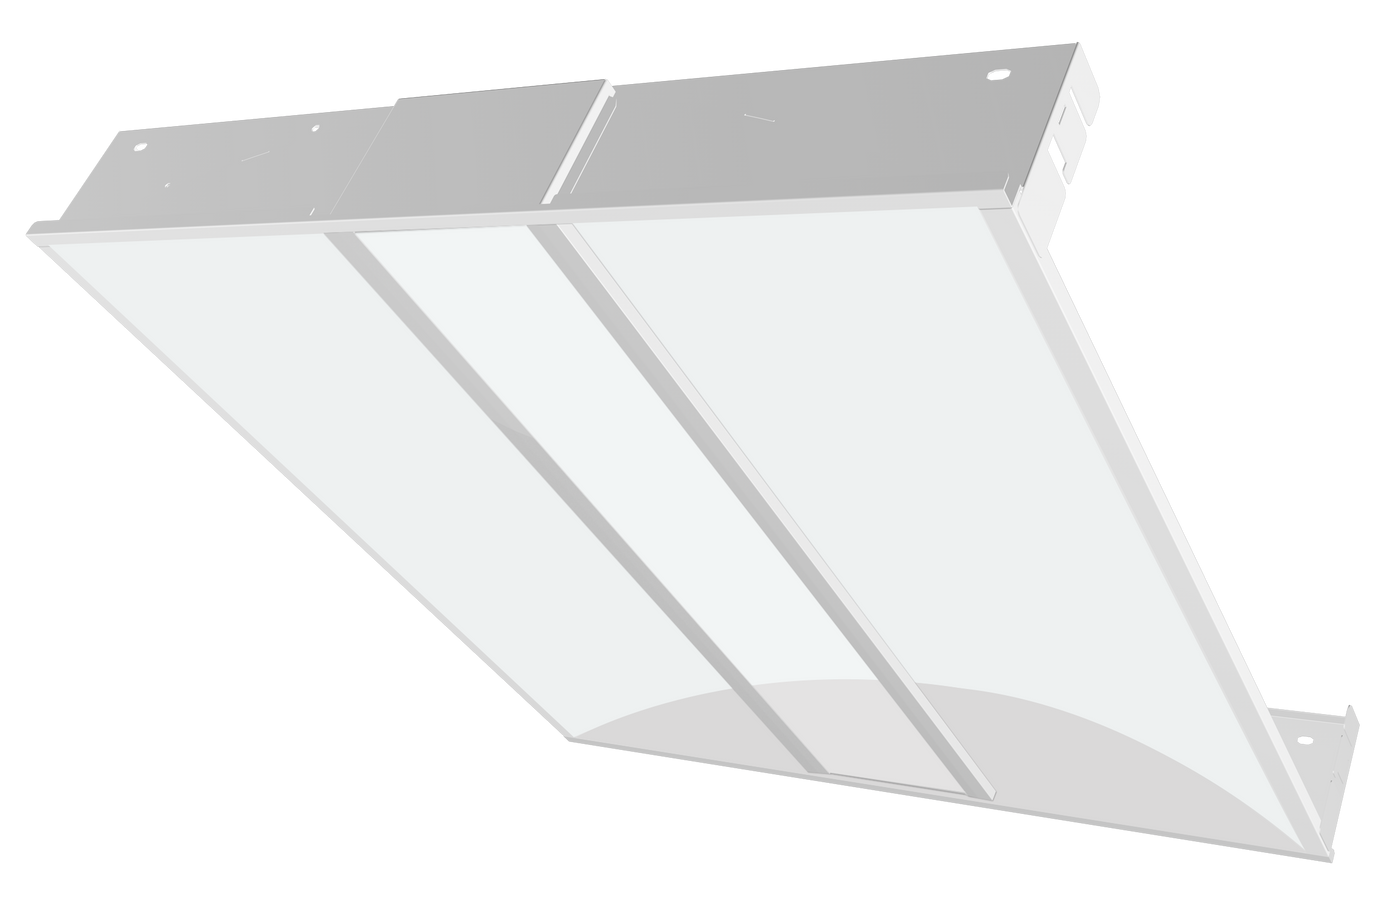 2x2 Premium Indirect LED Troffer, 4400 Lumen Max, Wattage and CCT Selectable, Dimming, 120-277V